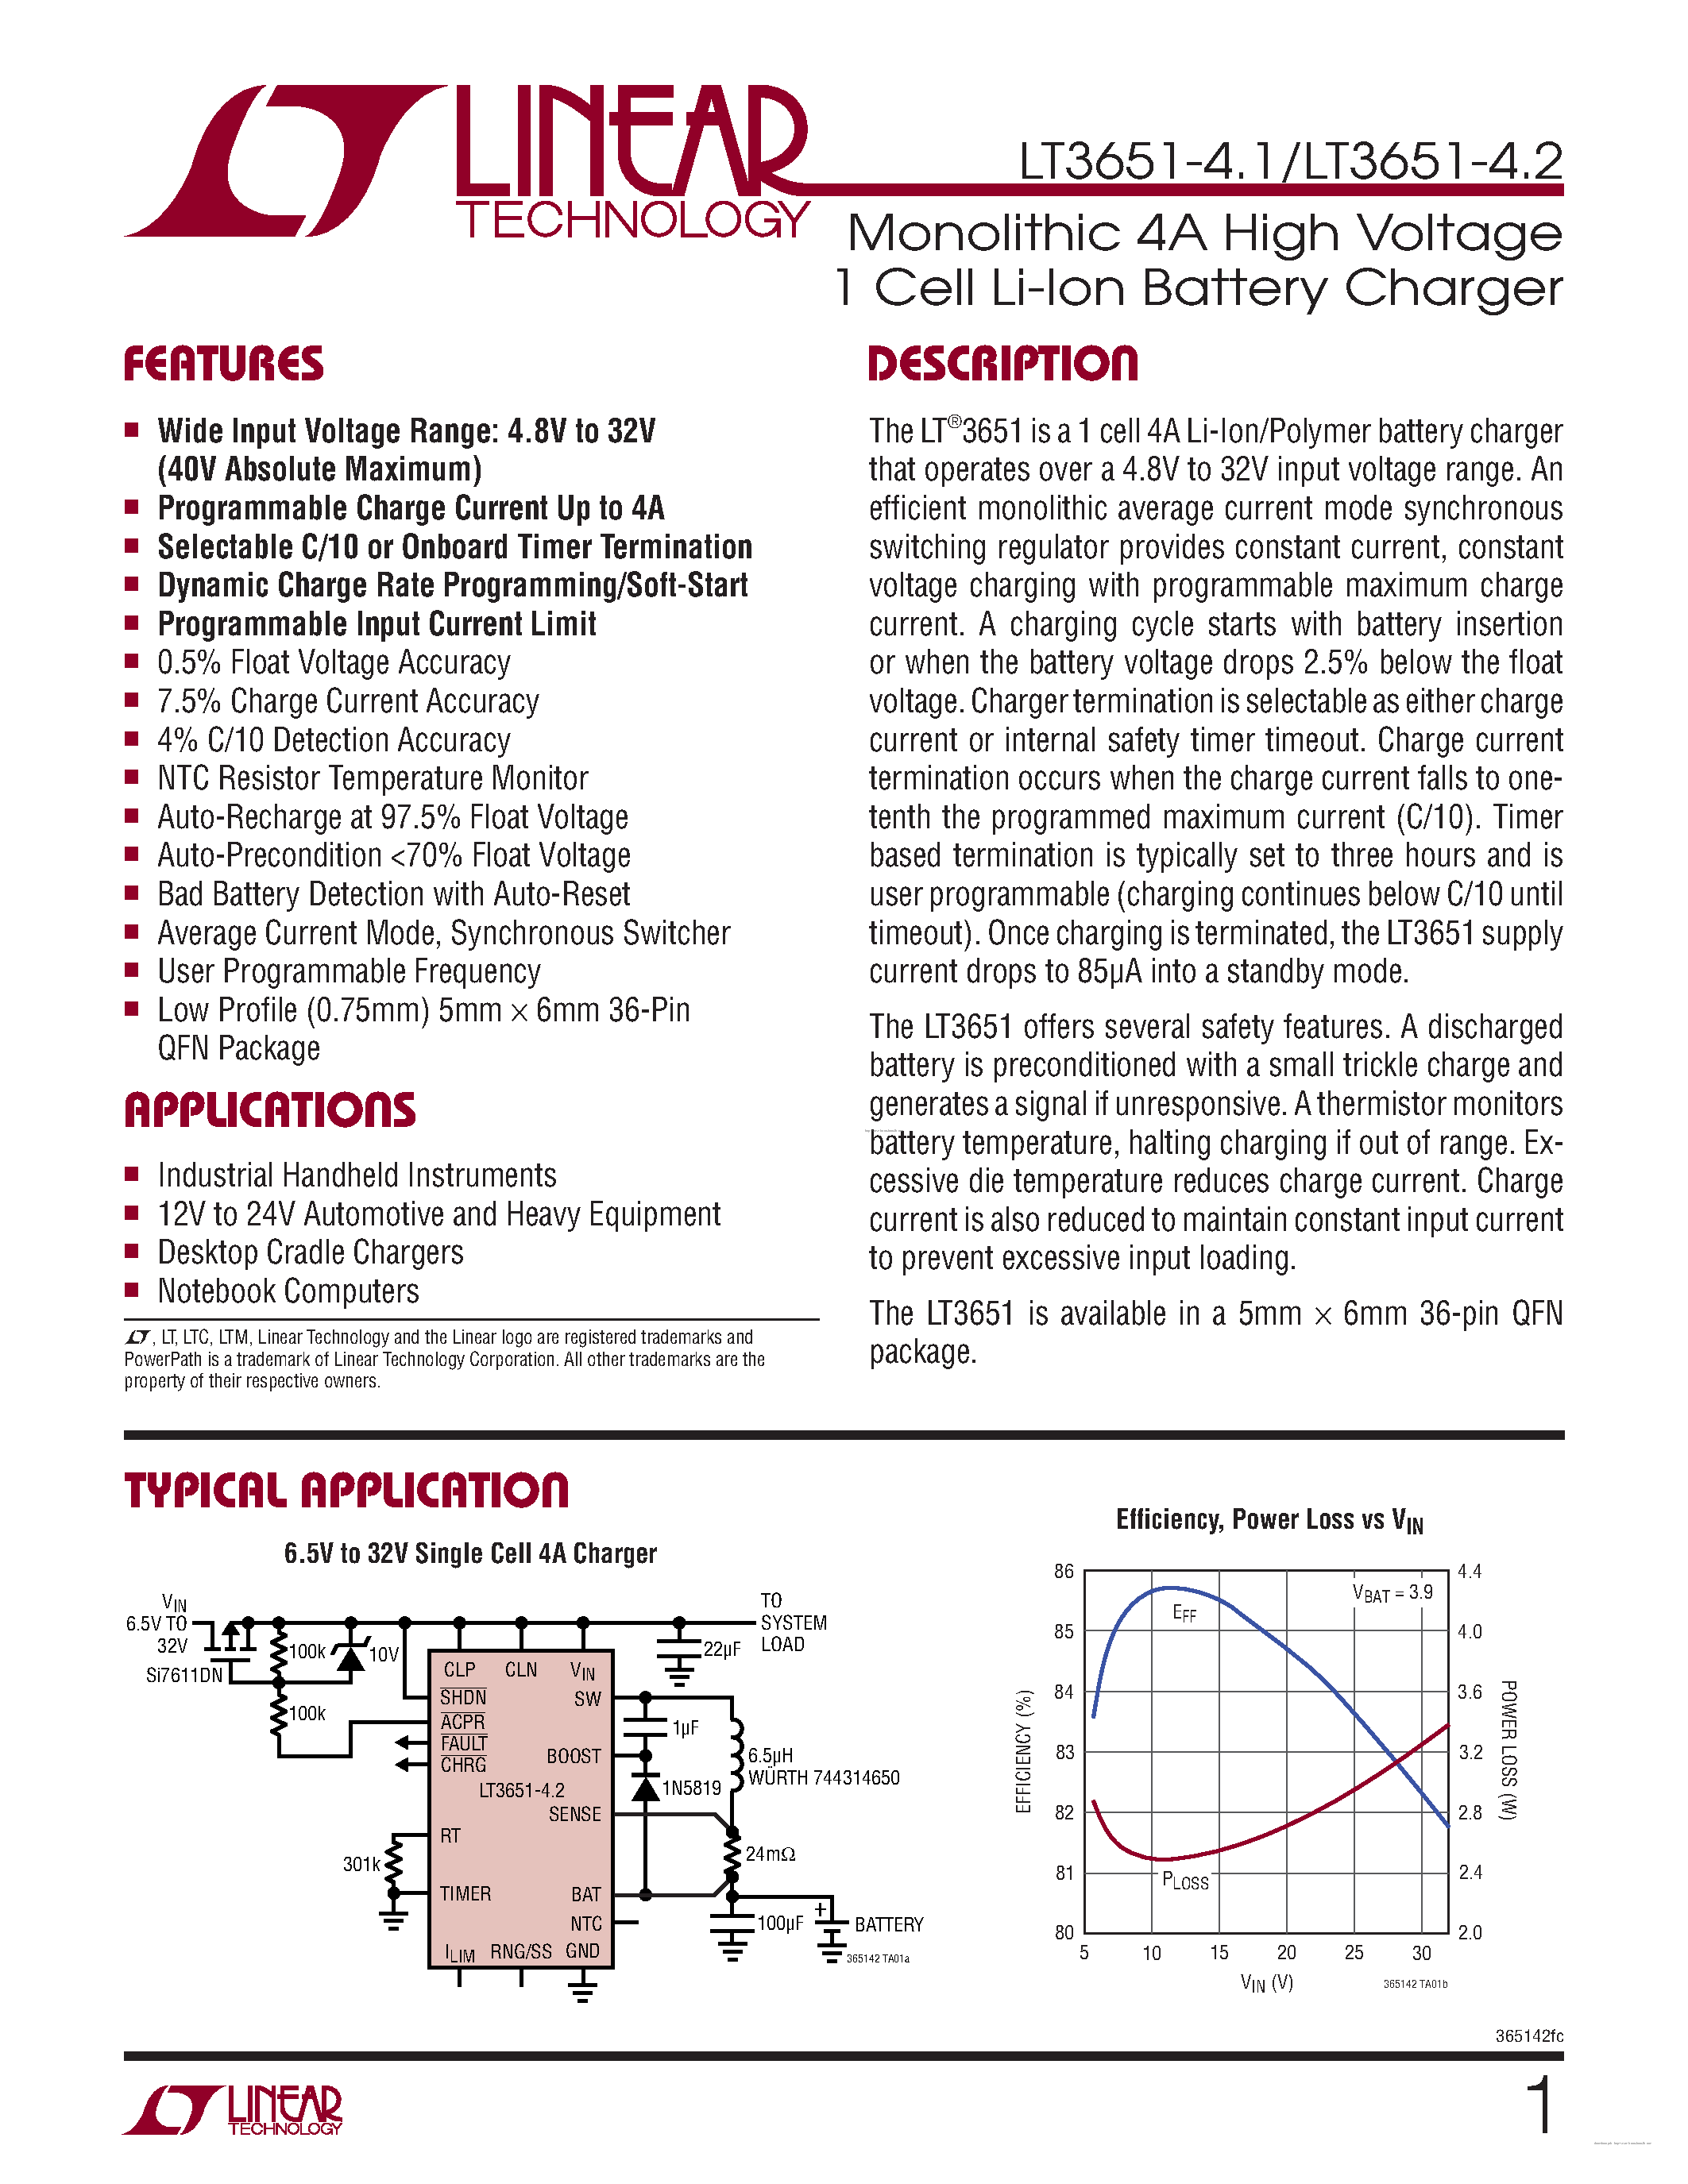 Datasheet LT3651-4.1 - (LT3651-4.1 / LT3651-4.2) Monolithic 4A High Voltage Li-Ion Battery Charger page 1